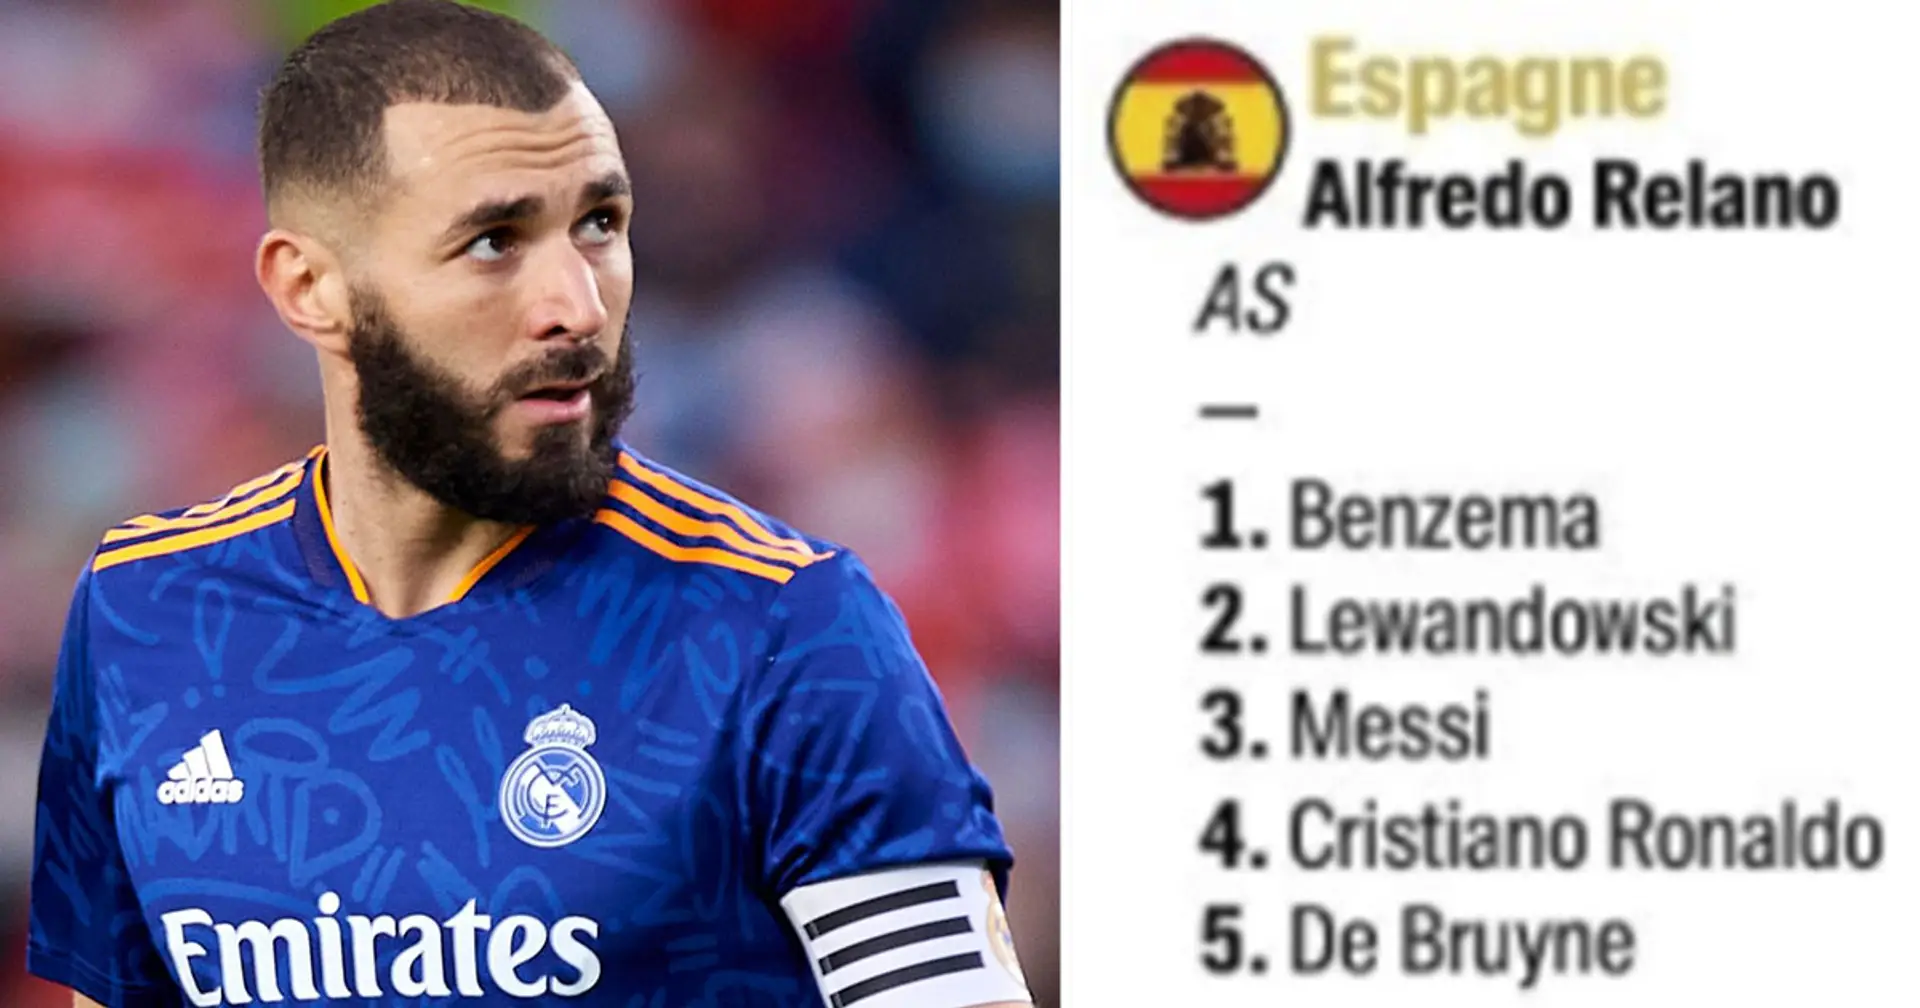 Spain and 10 more countries who put Benzema top of their Ballon d'Or rankings